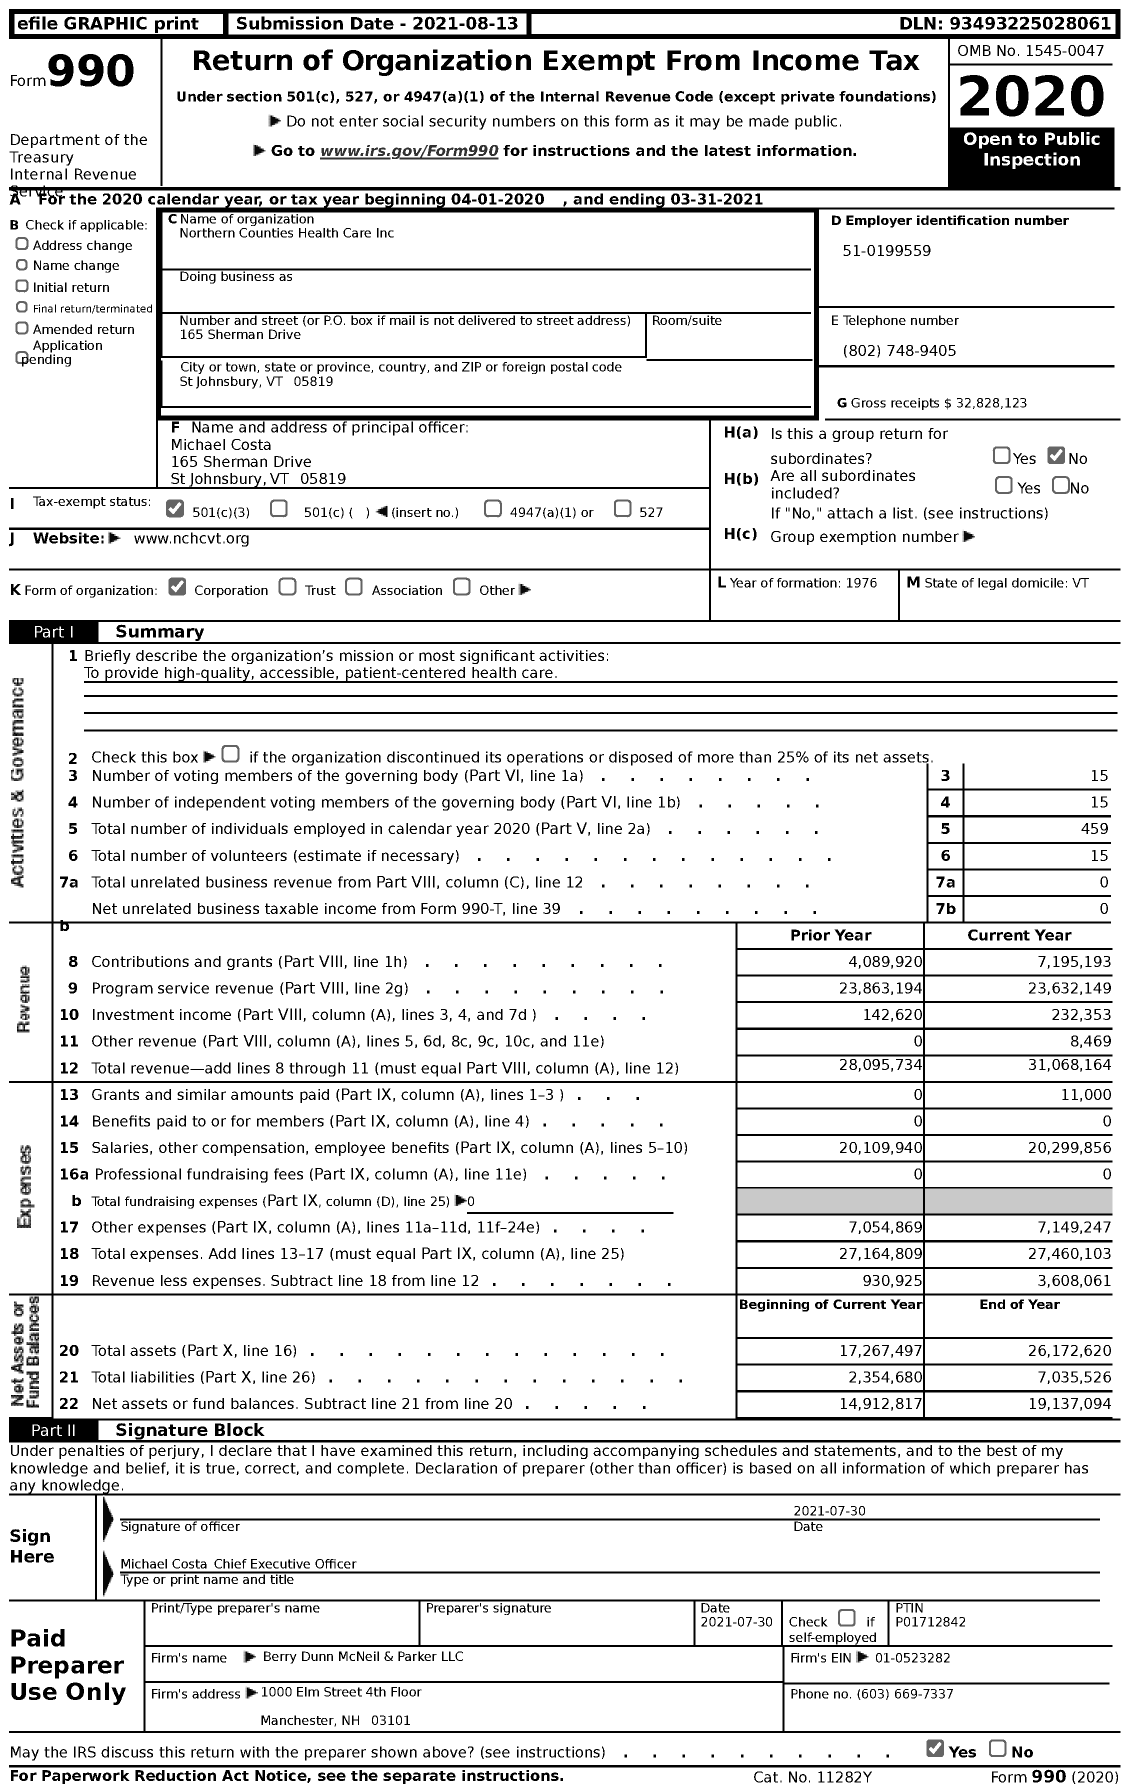 Image of first page of 2020 Form 990 for Northern Counties Health Care (NCHC)